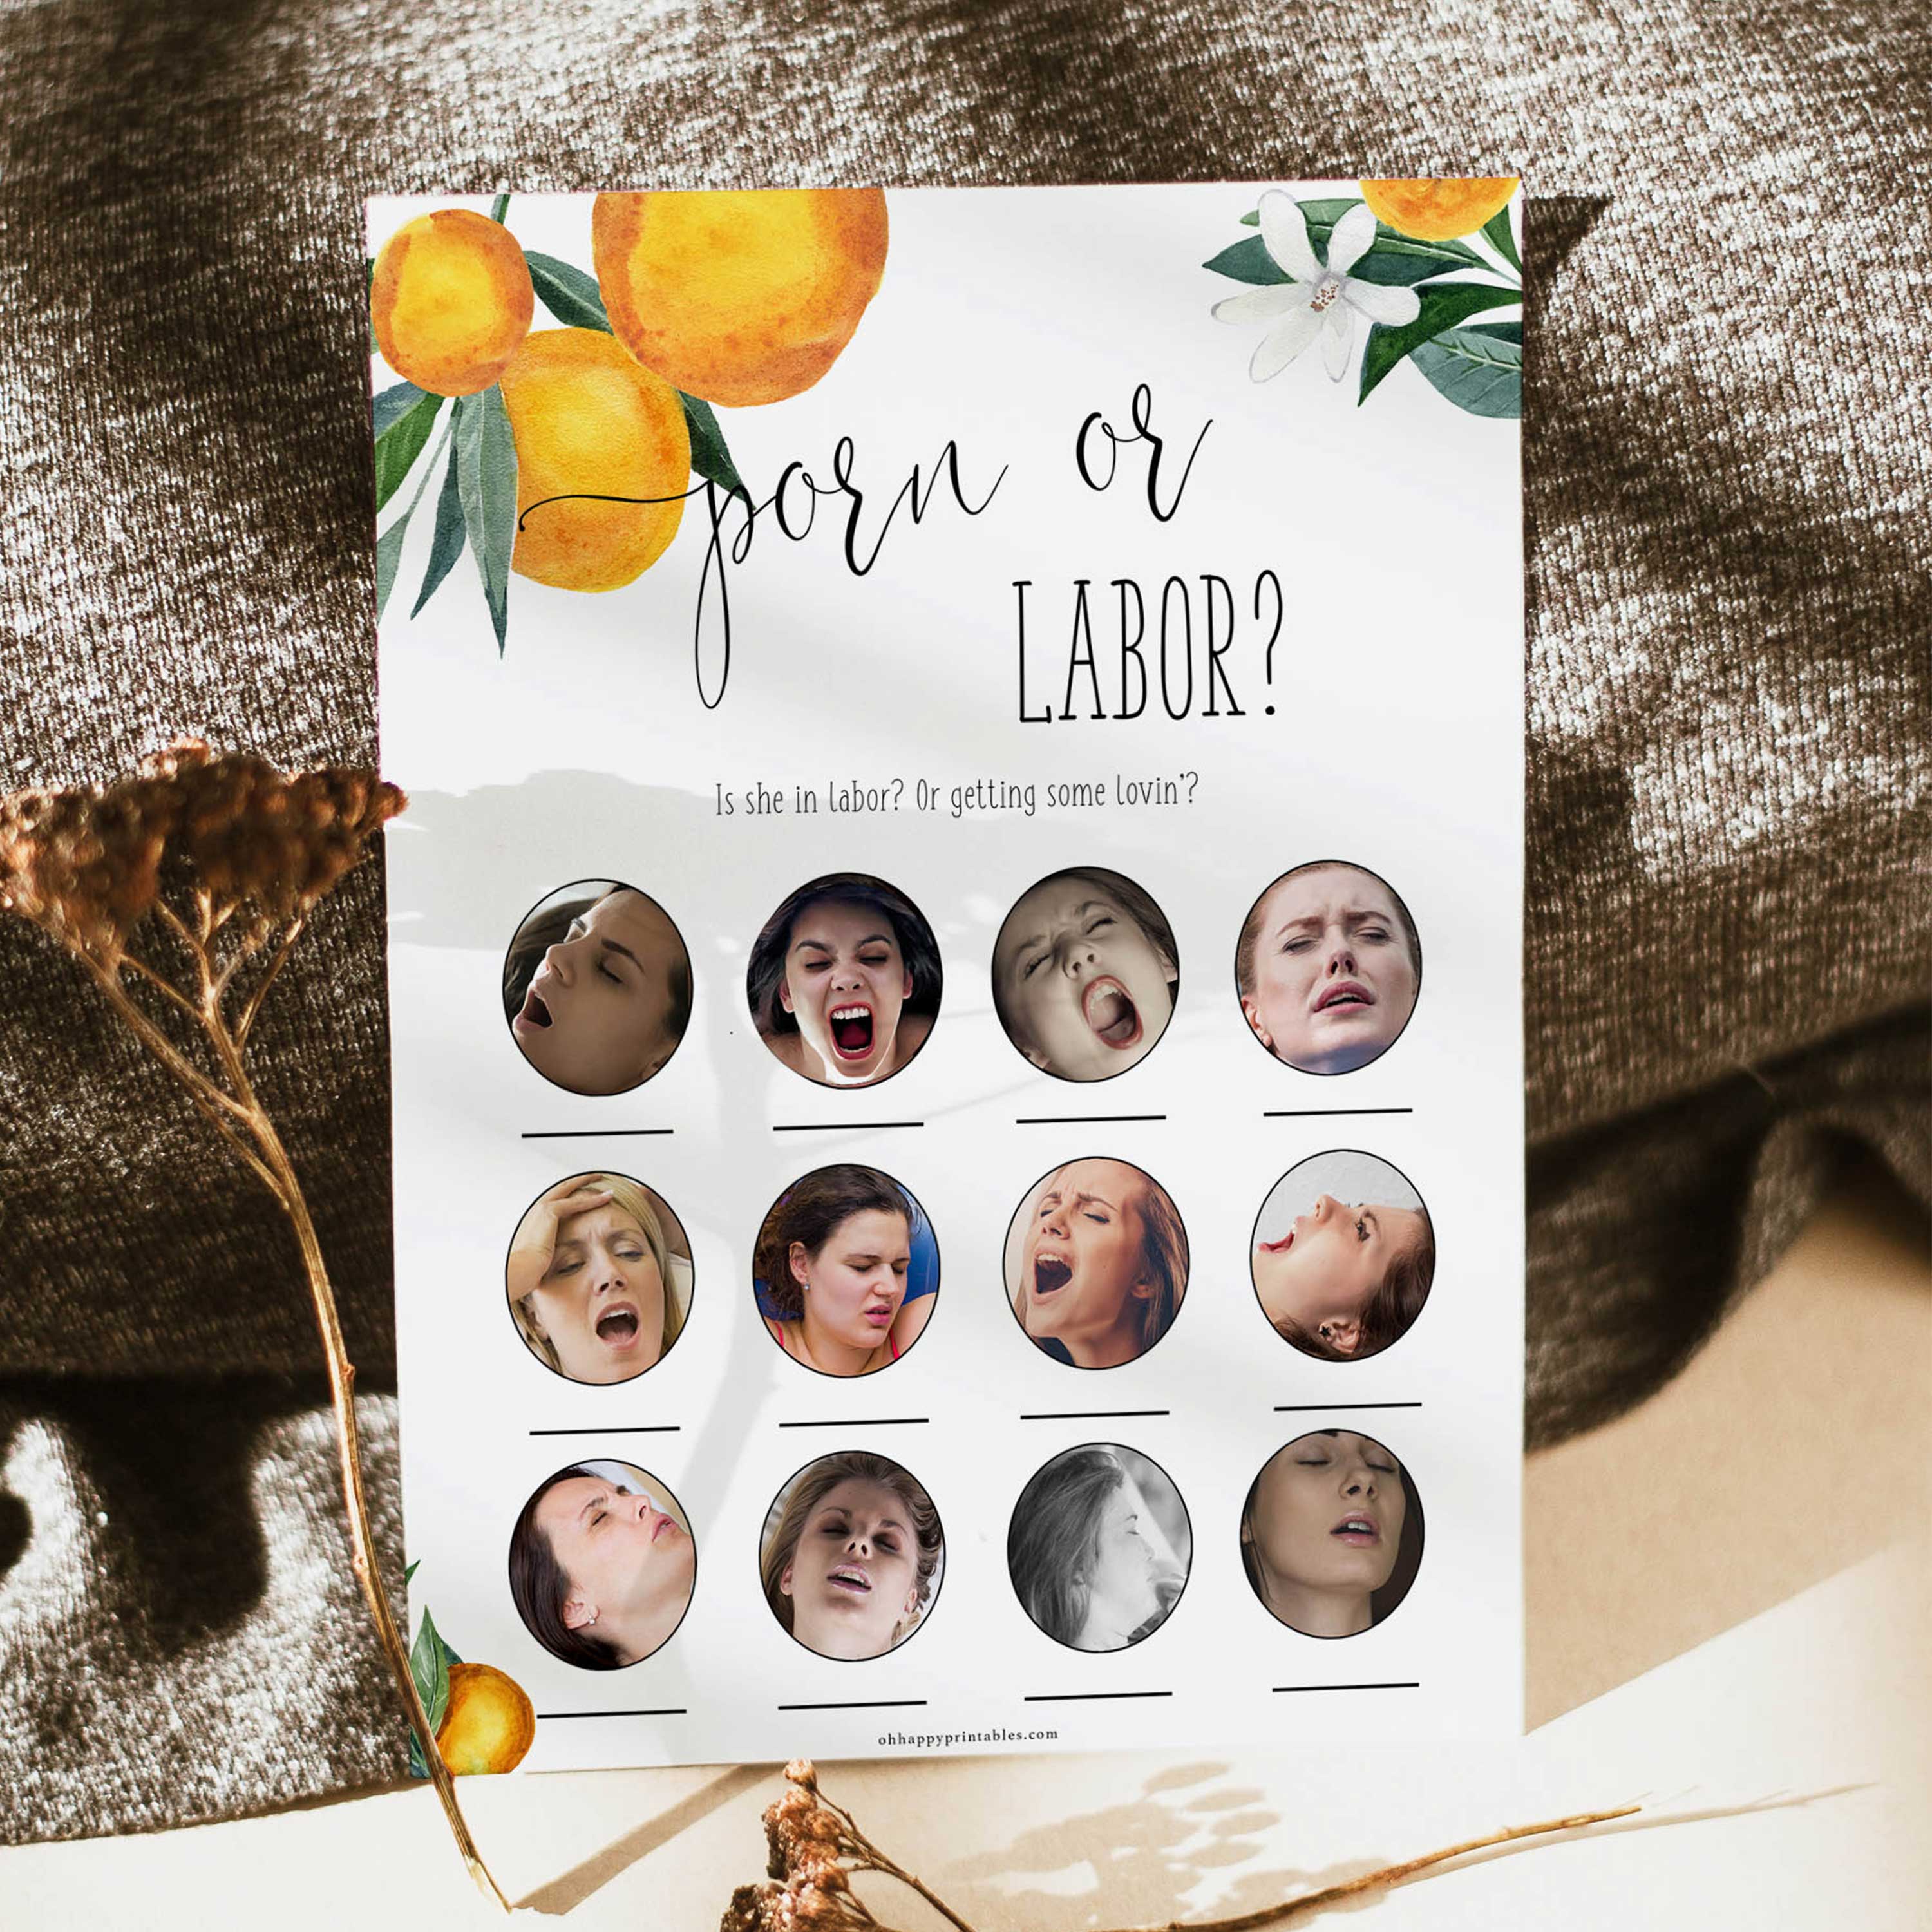 porn or labor baby shower game, Printable baby shower games, little cutie baby games, baby shower games, fun baby shower ideas, top baby shower ideas, little cutie baby shower, baby shower games, fun little cutie baby shower ideas, citrus baby shower games, citrus baby shower, orange baby shower